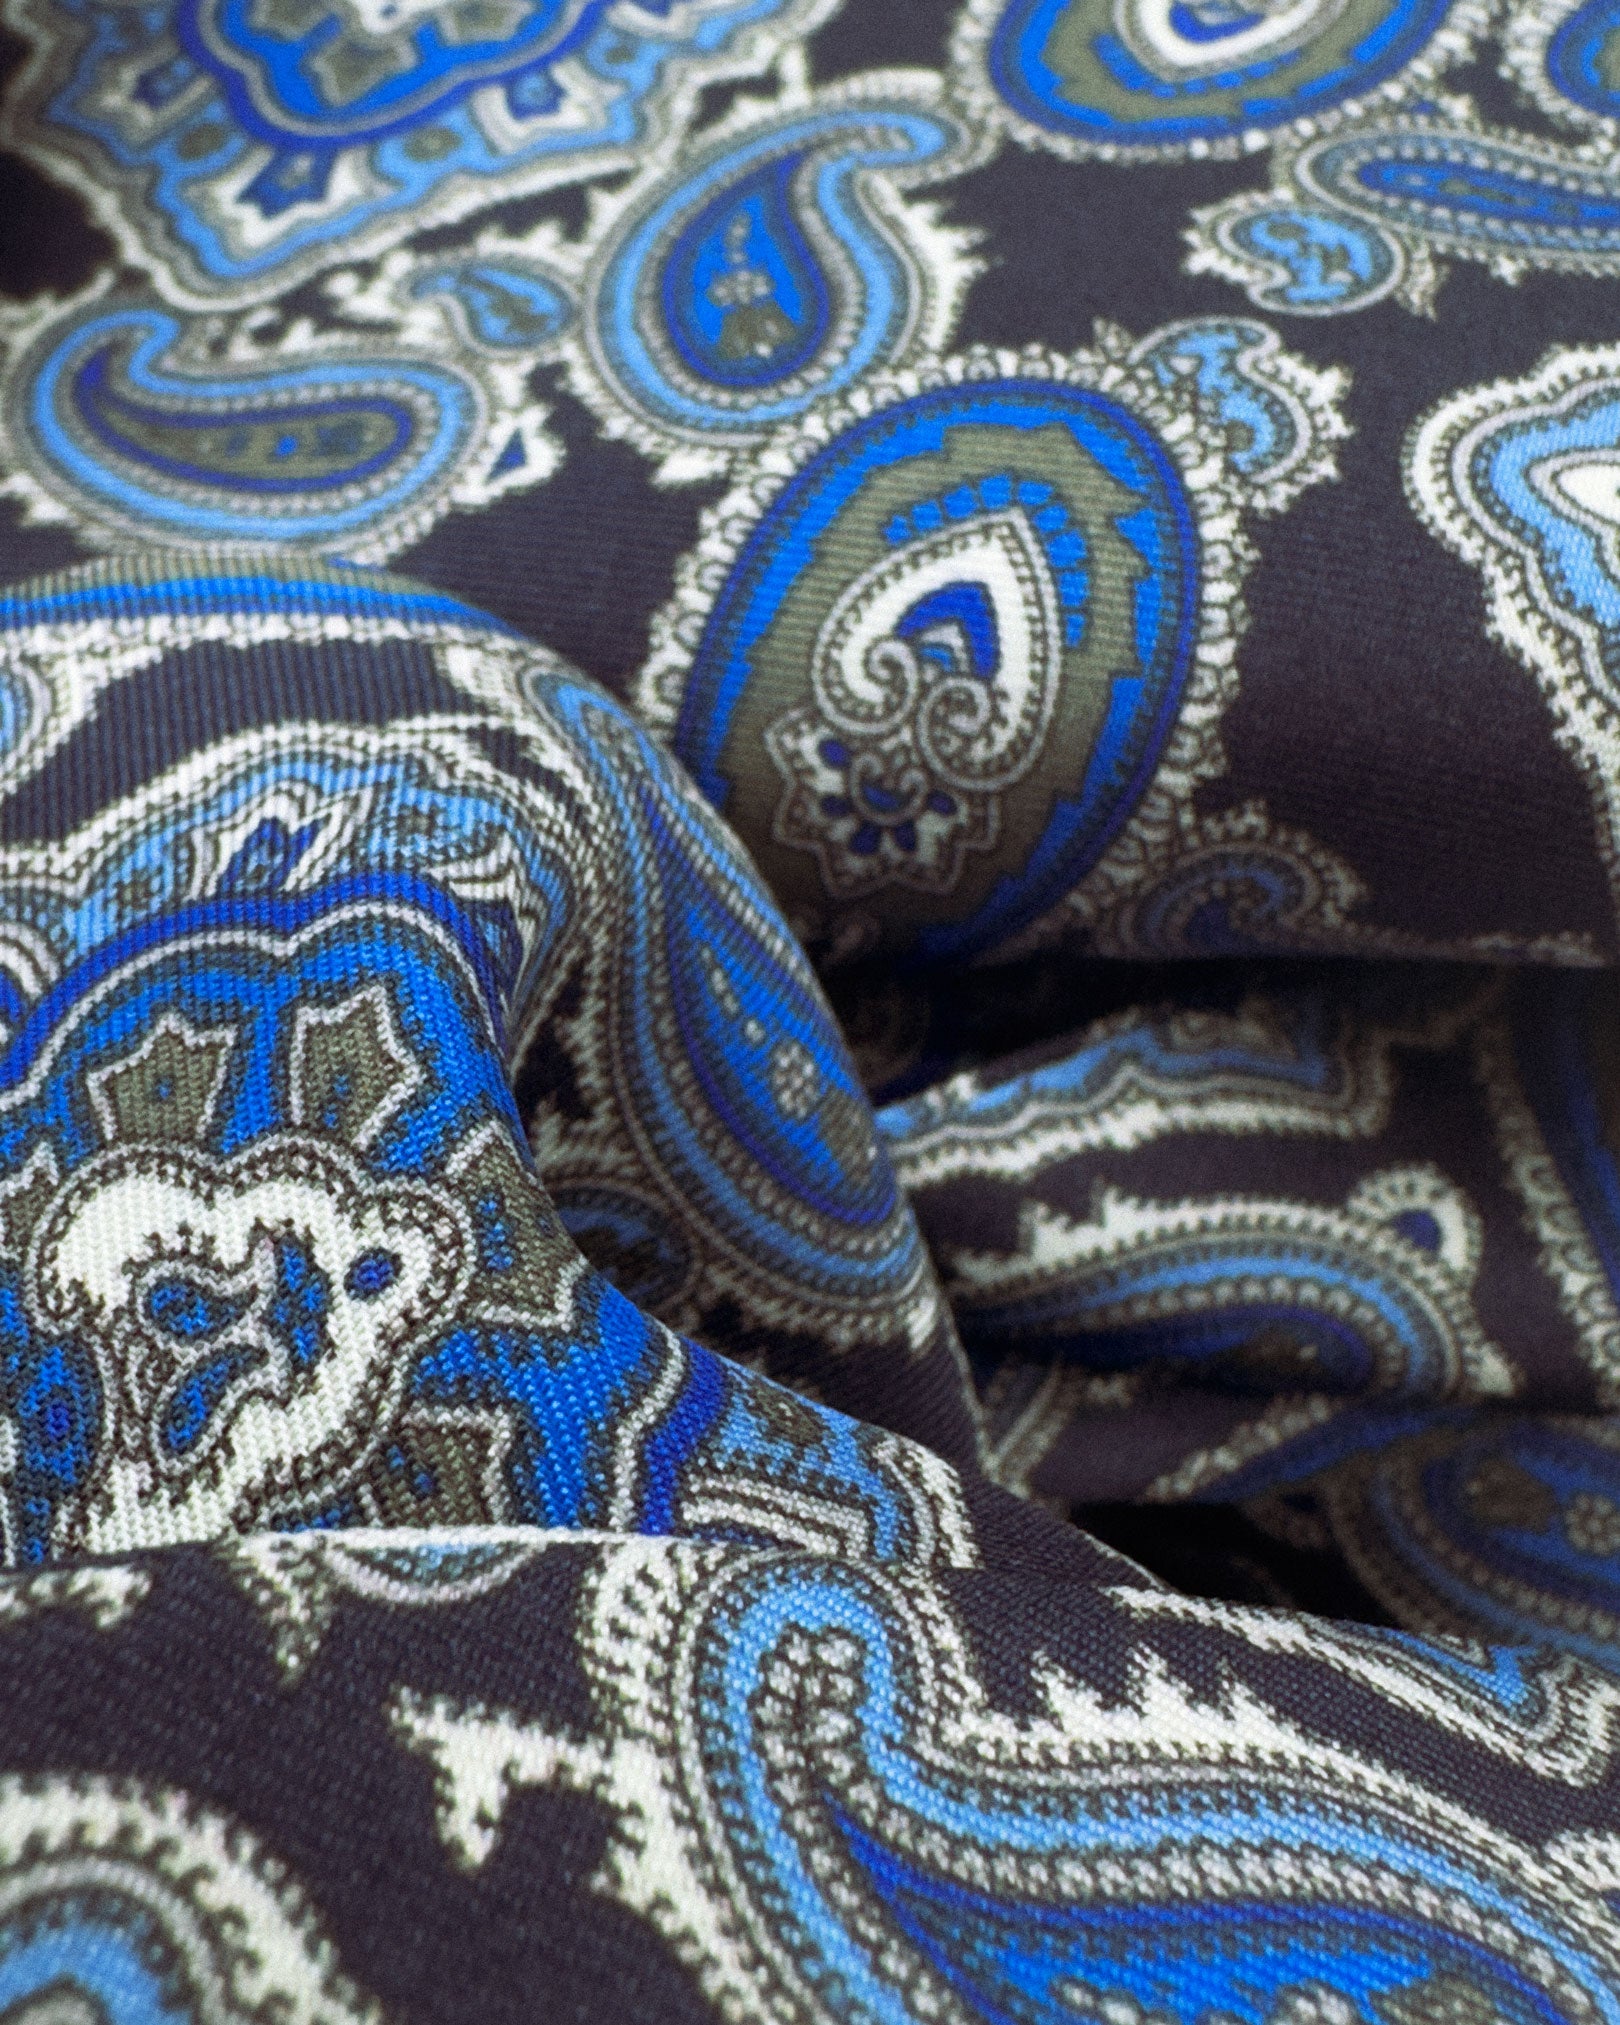 Ruffled close-up view of the Dezon silk scarf, presenting a closer view of the blue paisley patterns on a dark blue background.